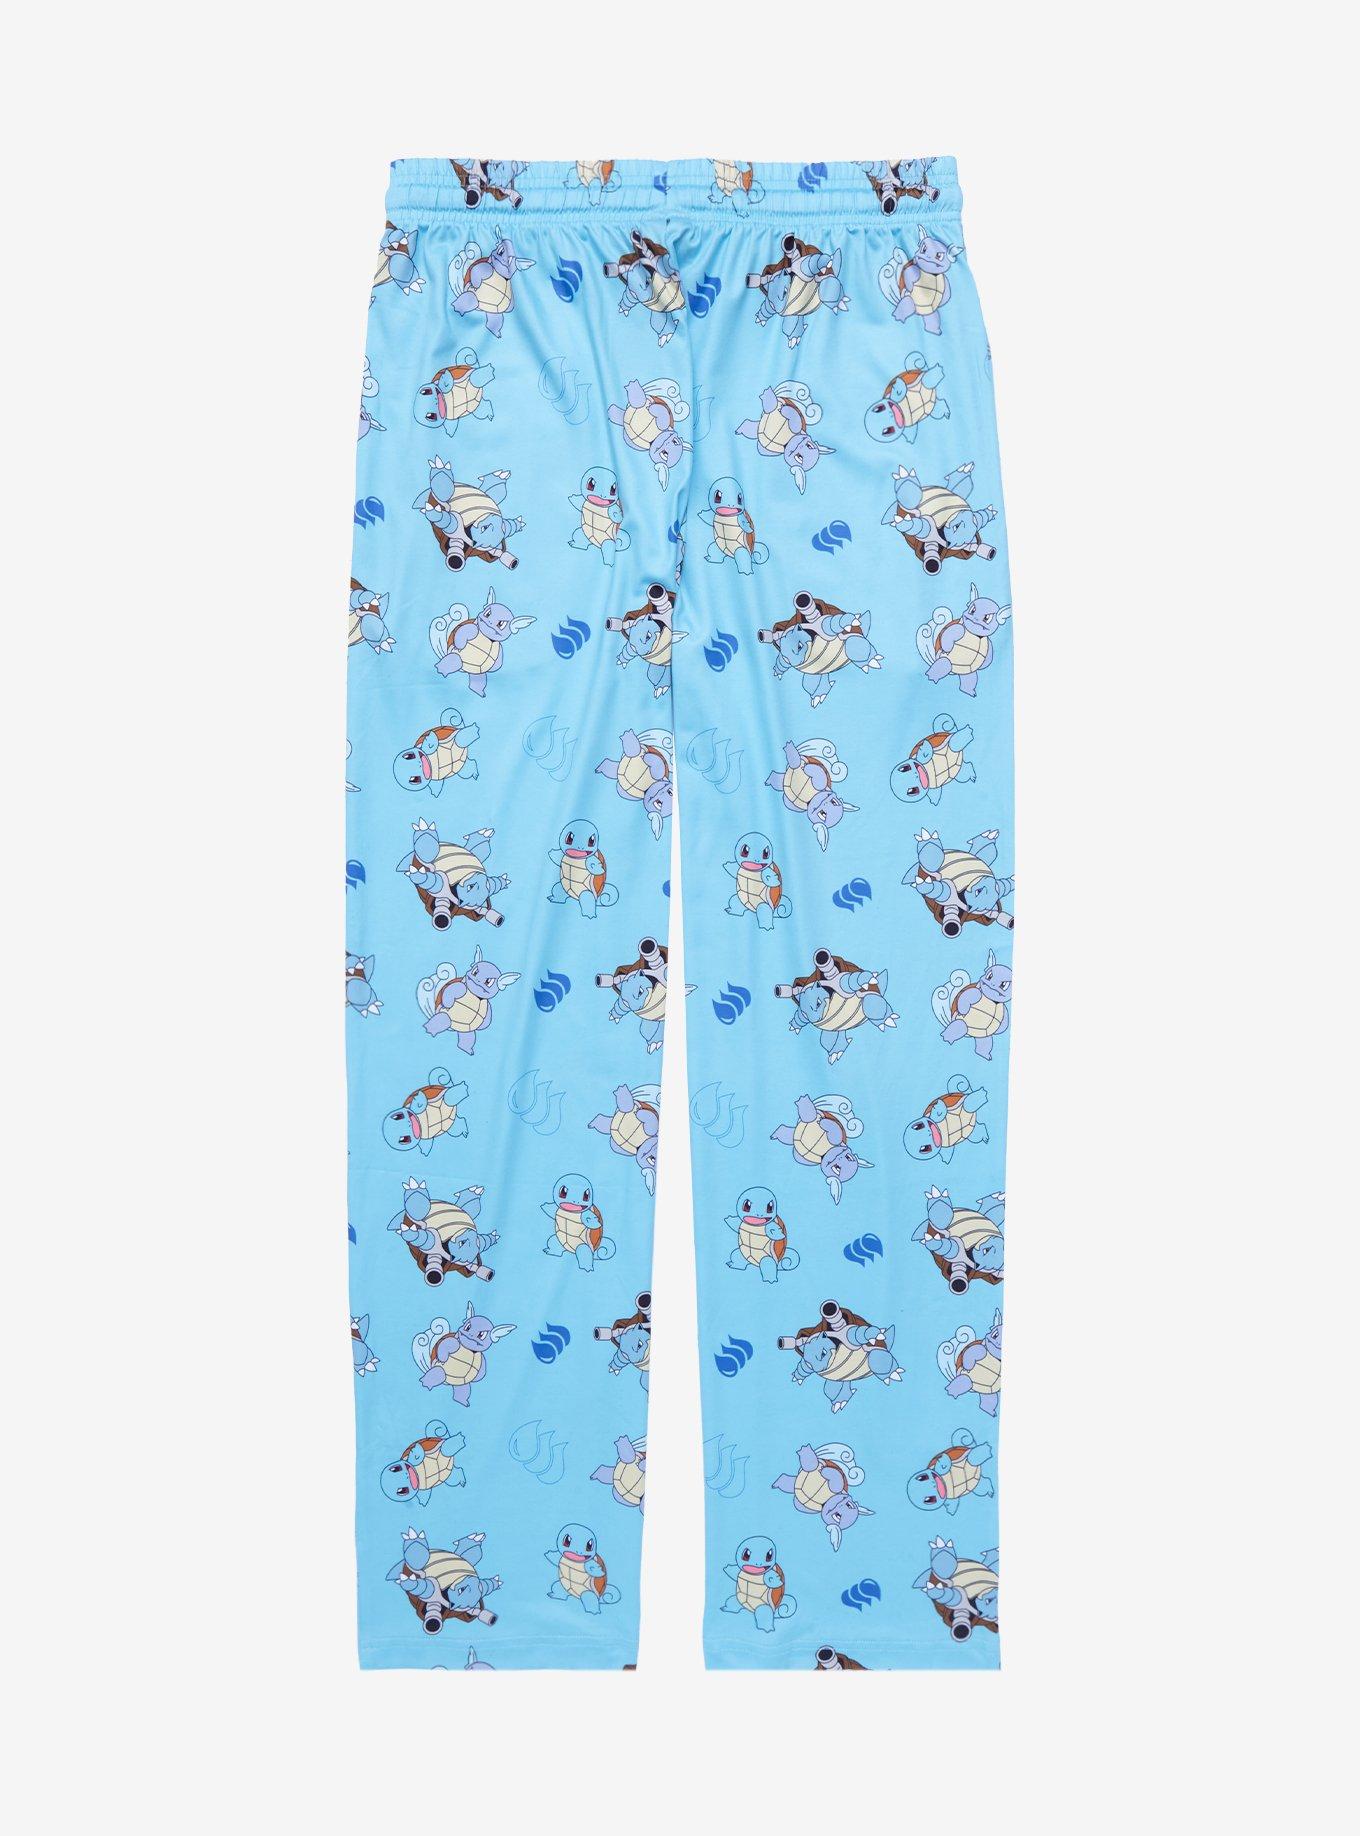 Pokémon Squirtle Evolutions Allover Print Sleep Pants - BoxLunch Exclusive, GREEN, alternate